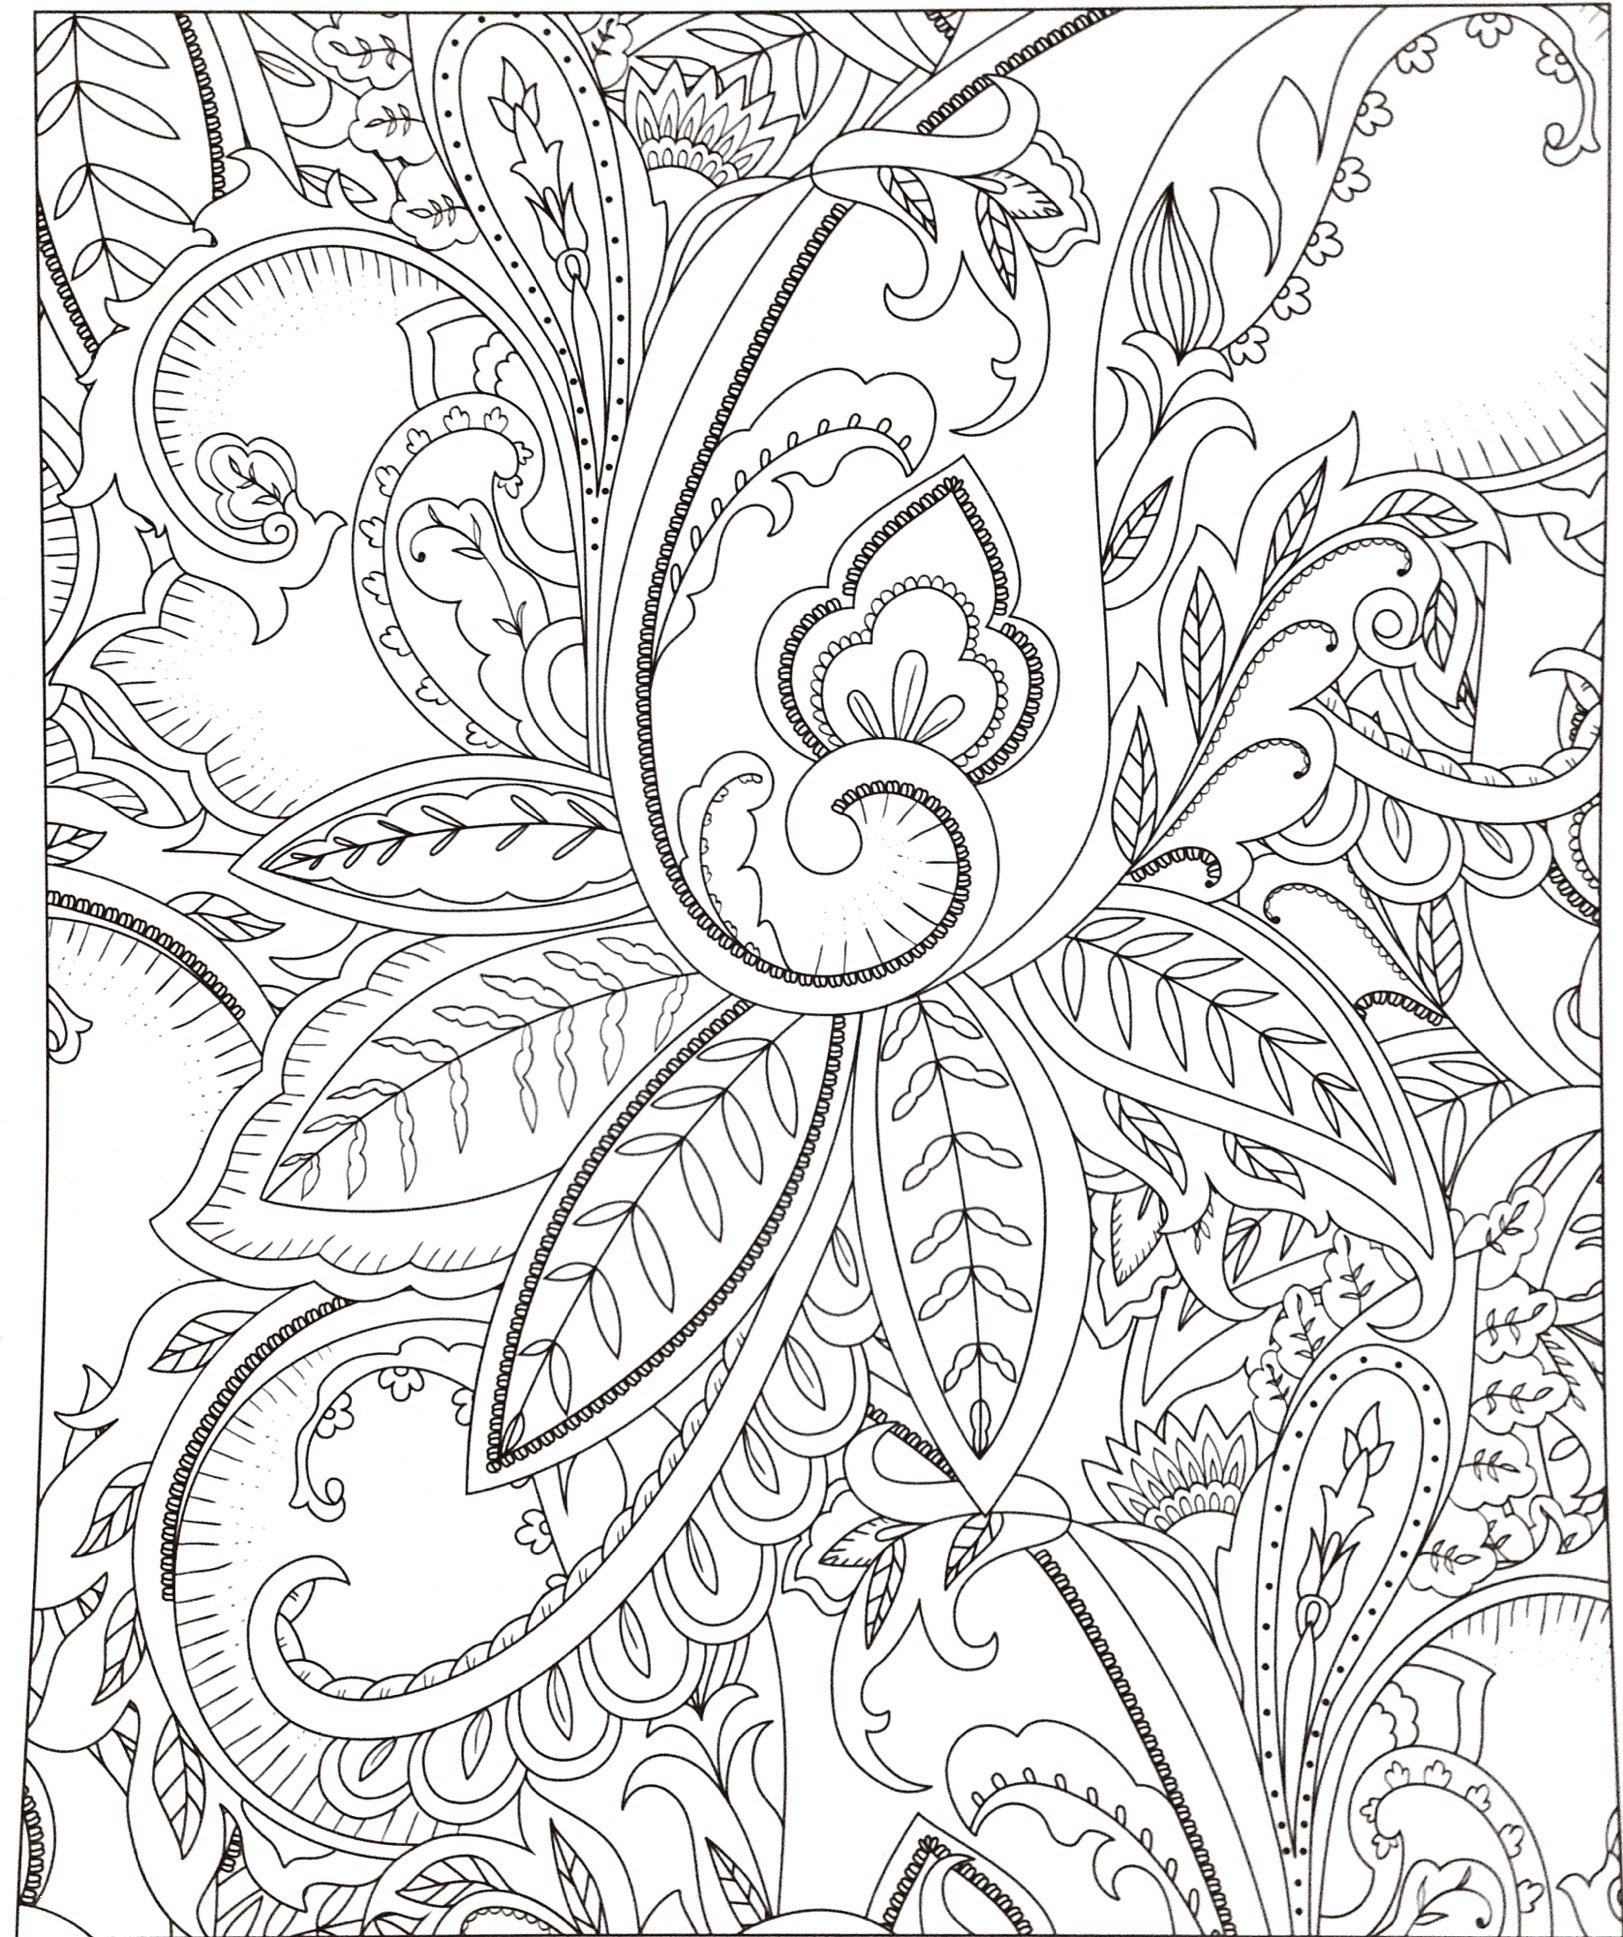 Coloring Pages Butterflies Free Luxury Free Coloring Fresh Book Page Image Beautiful Page Coloring 0d Free